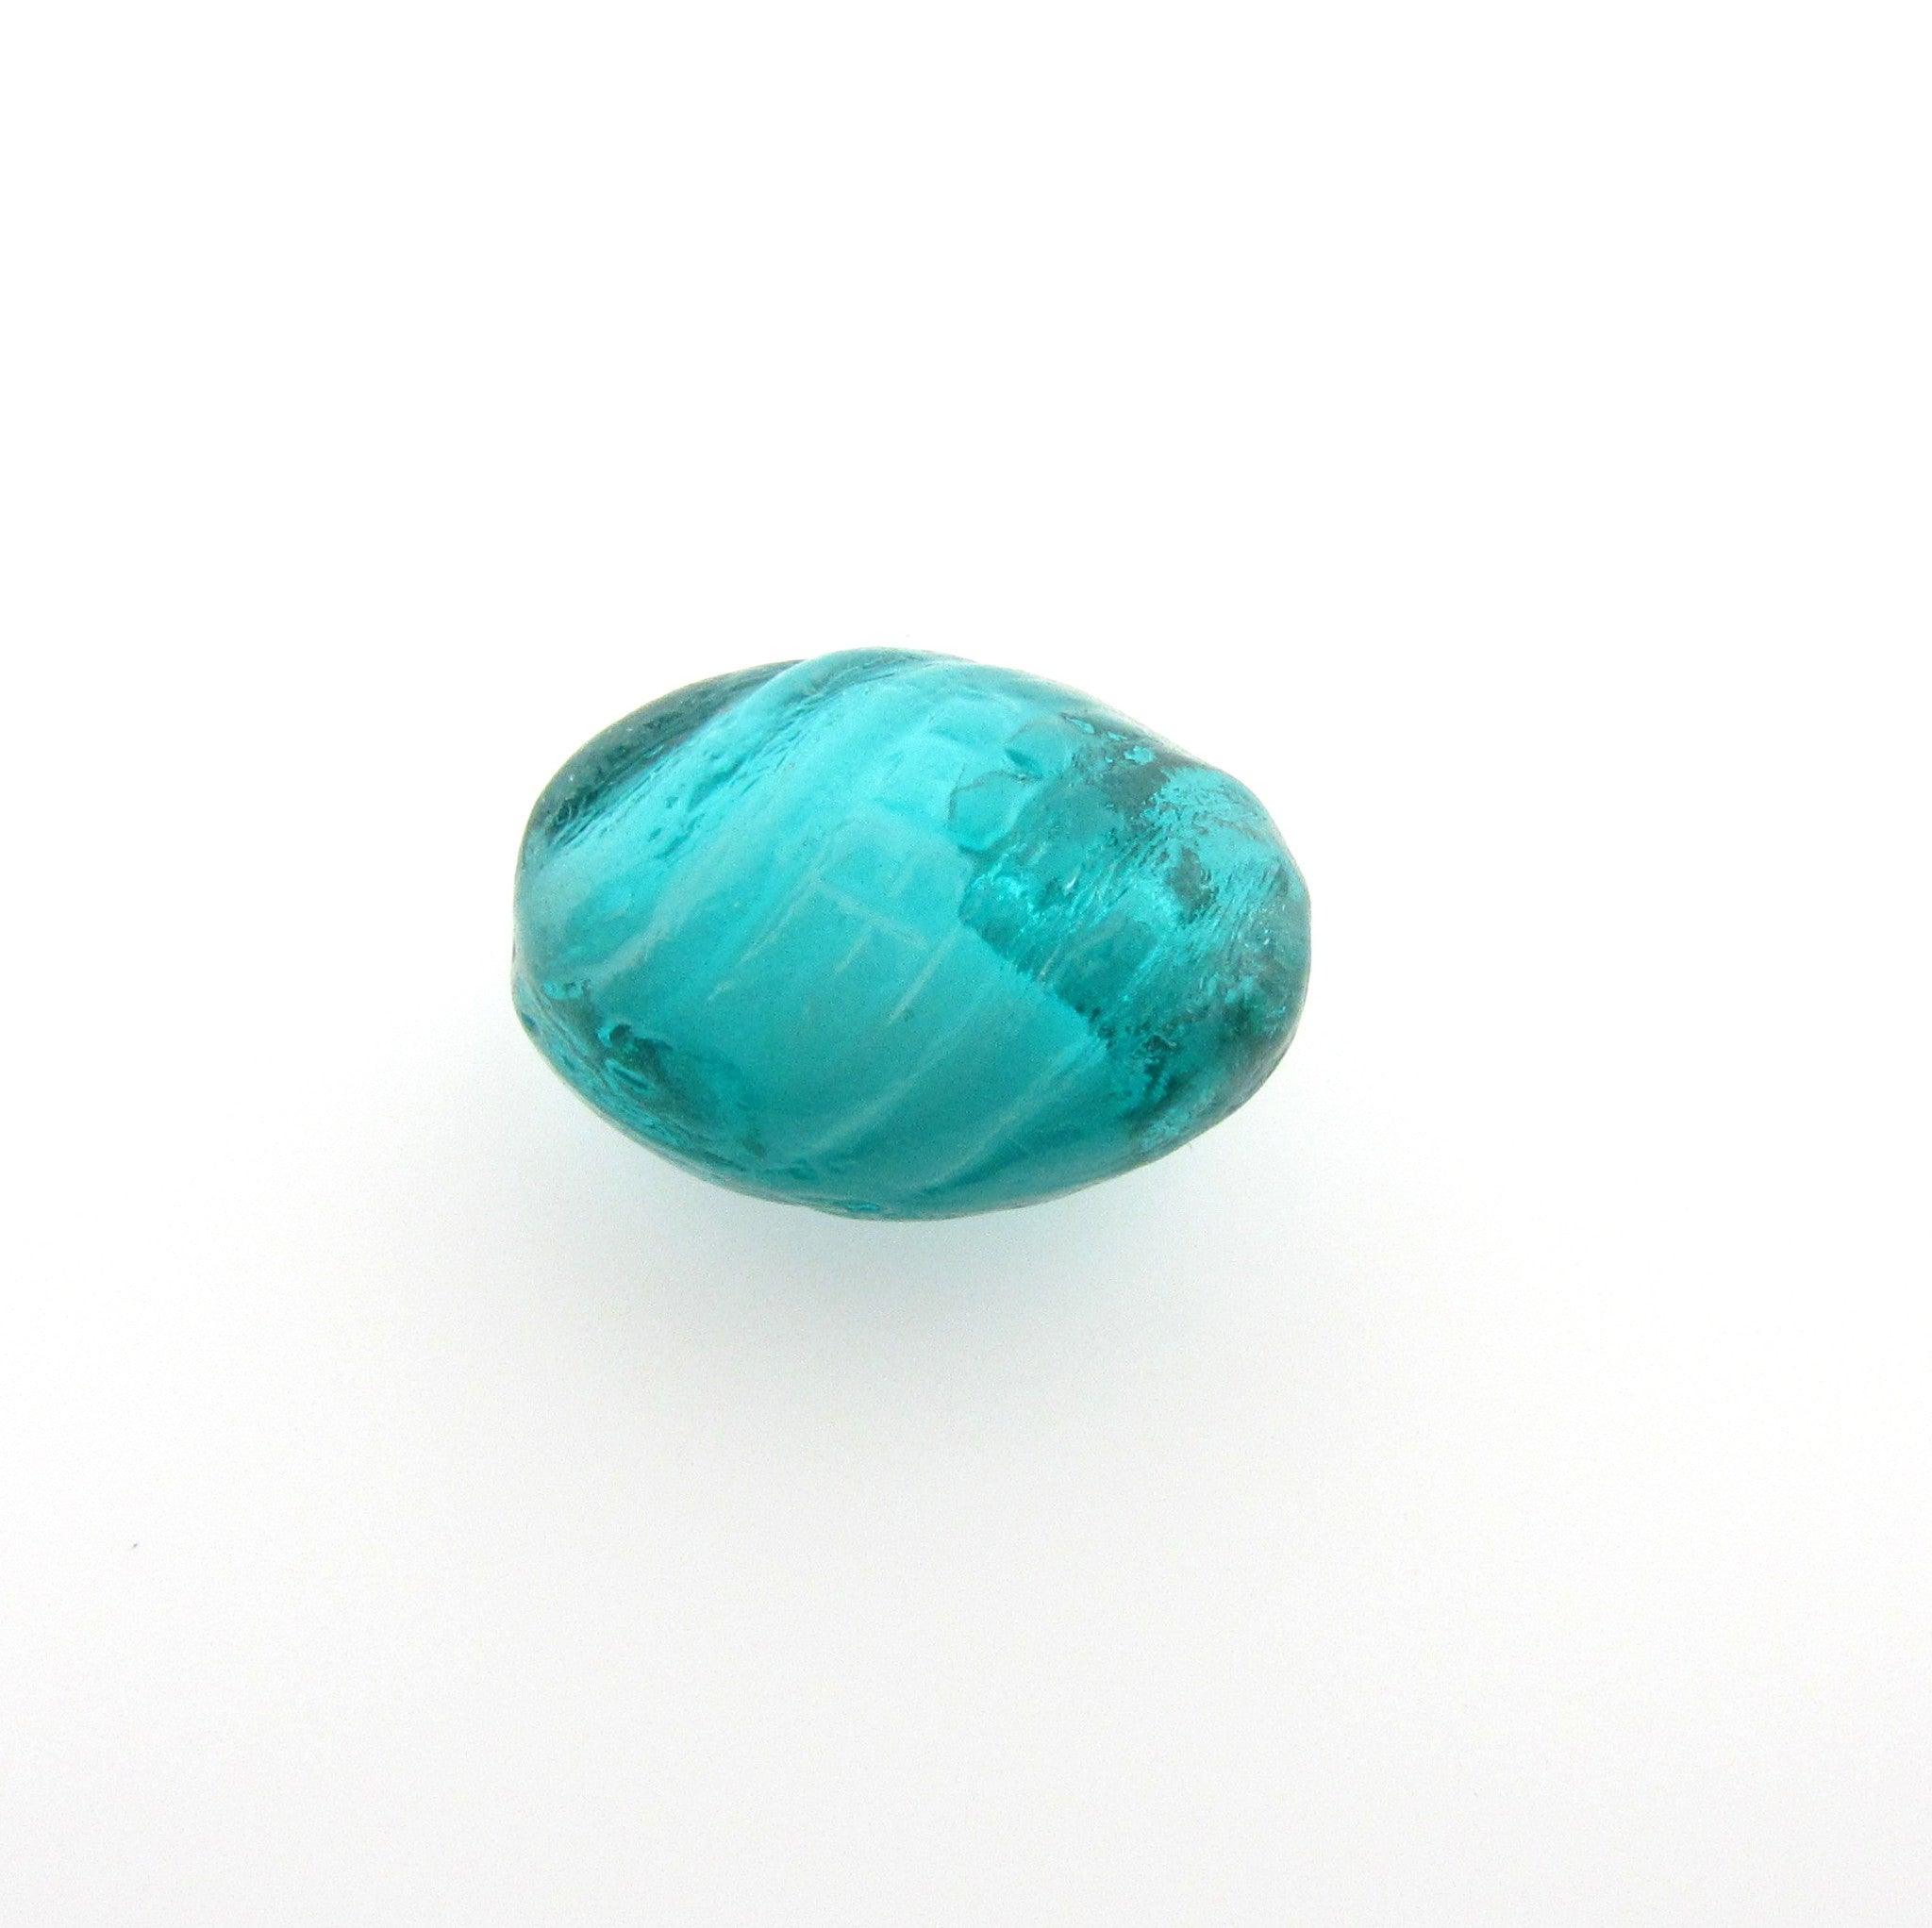 Fancy Teal Oval Glass Bead (36 pieces)